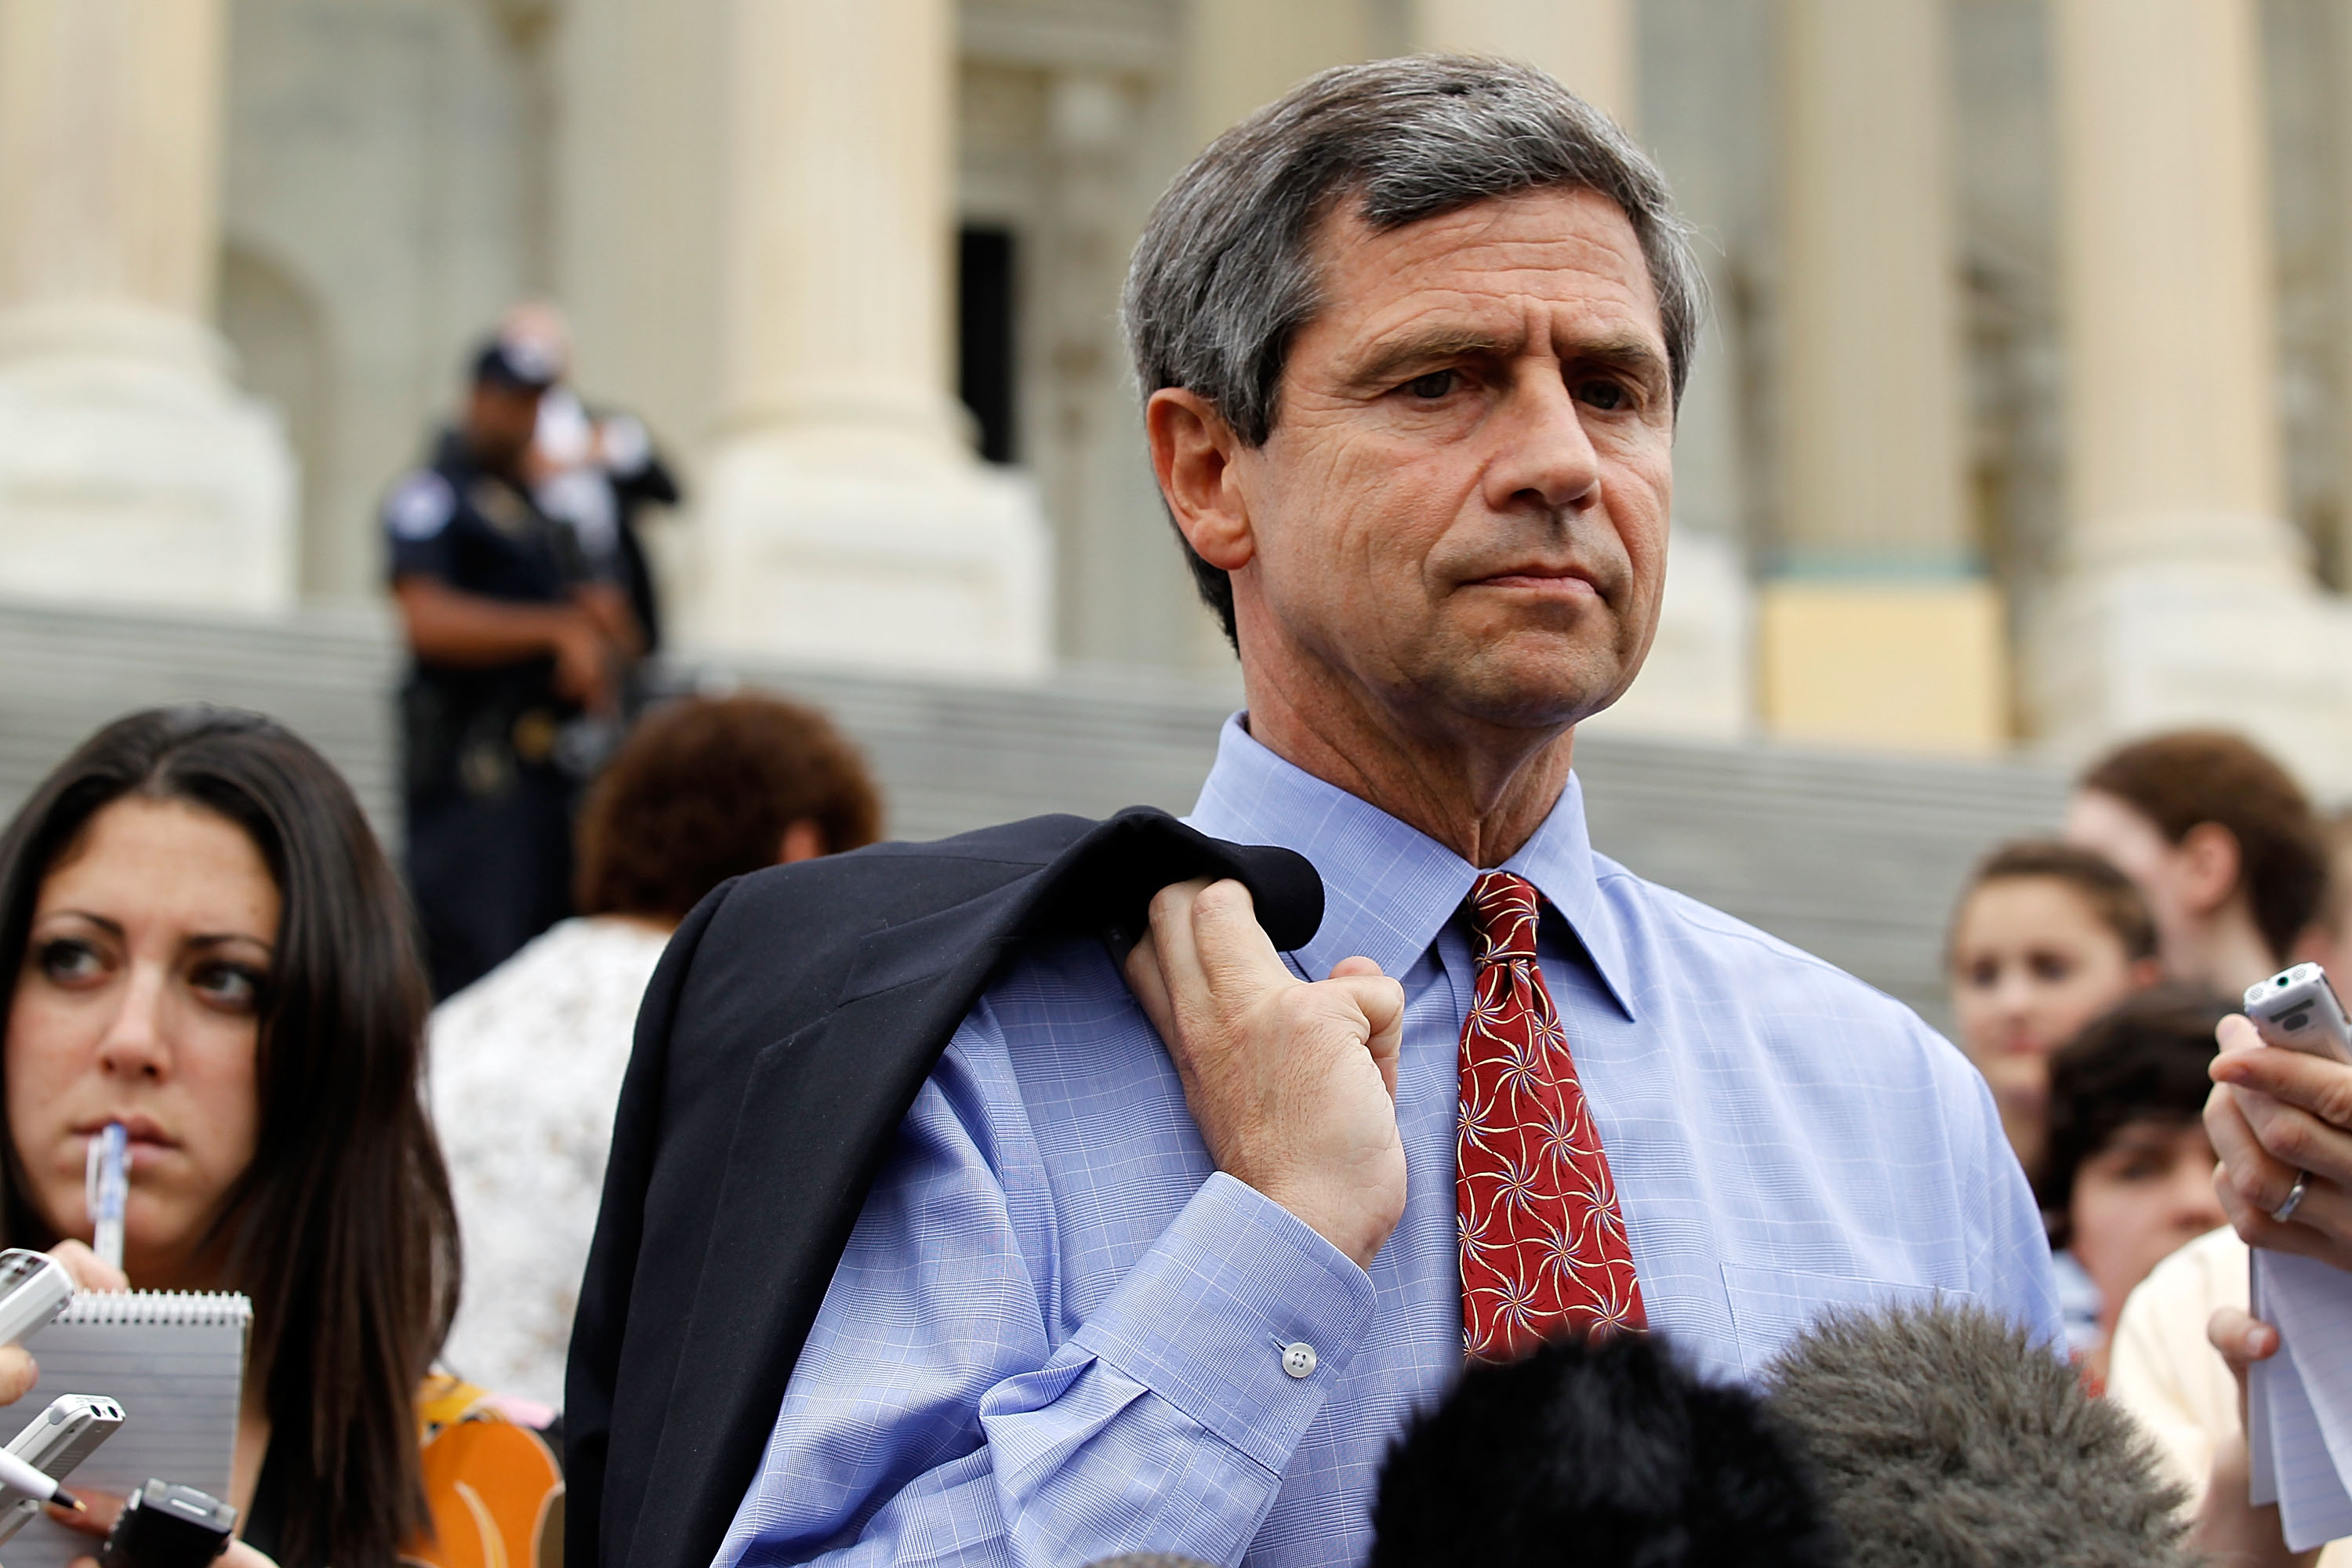 Rep. Joe Sestak (D-PA) speaks to the media outside the Capitol May 28, 2010 on Capitol Hill in Washington, DC. Sestak responded to the allegation of the job offer by the White House in exchange his drop-out from the Democratic senate primary against Sen. Arlen Specter. (Photo by Alex Wong/Getty Images) (Alex Wong—Getty Images)